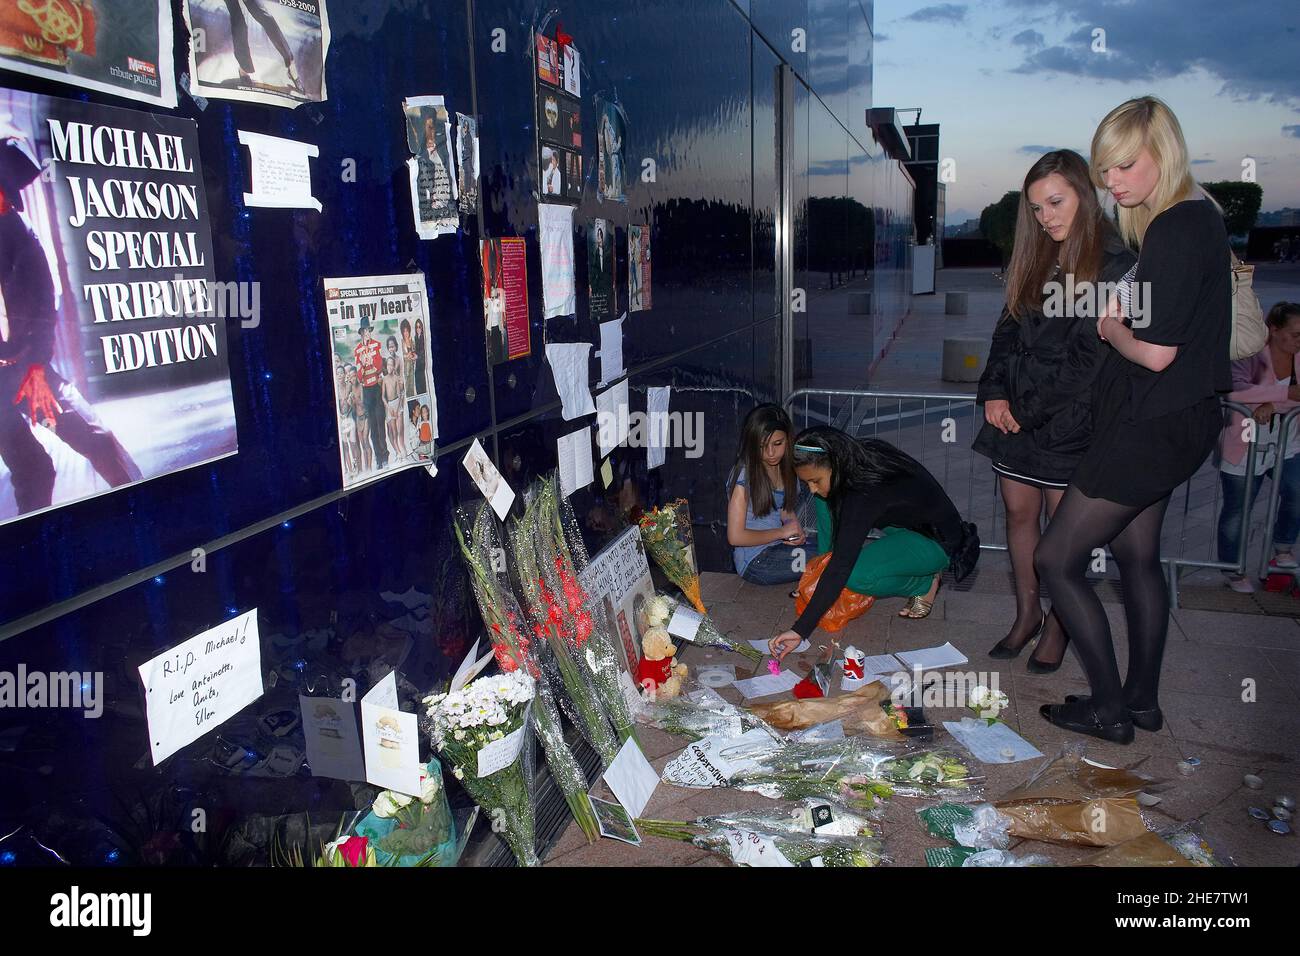 Michael Jackson fans stand at a shrine to the American singer, Tributes left at a shrine for Michael Jackson, outside the O2 Arena, London. Stock Photo